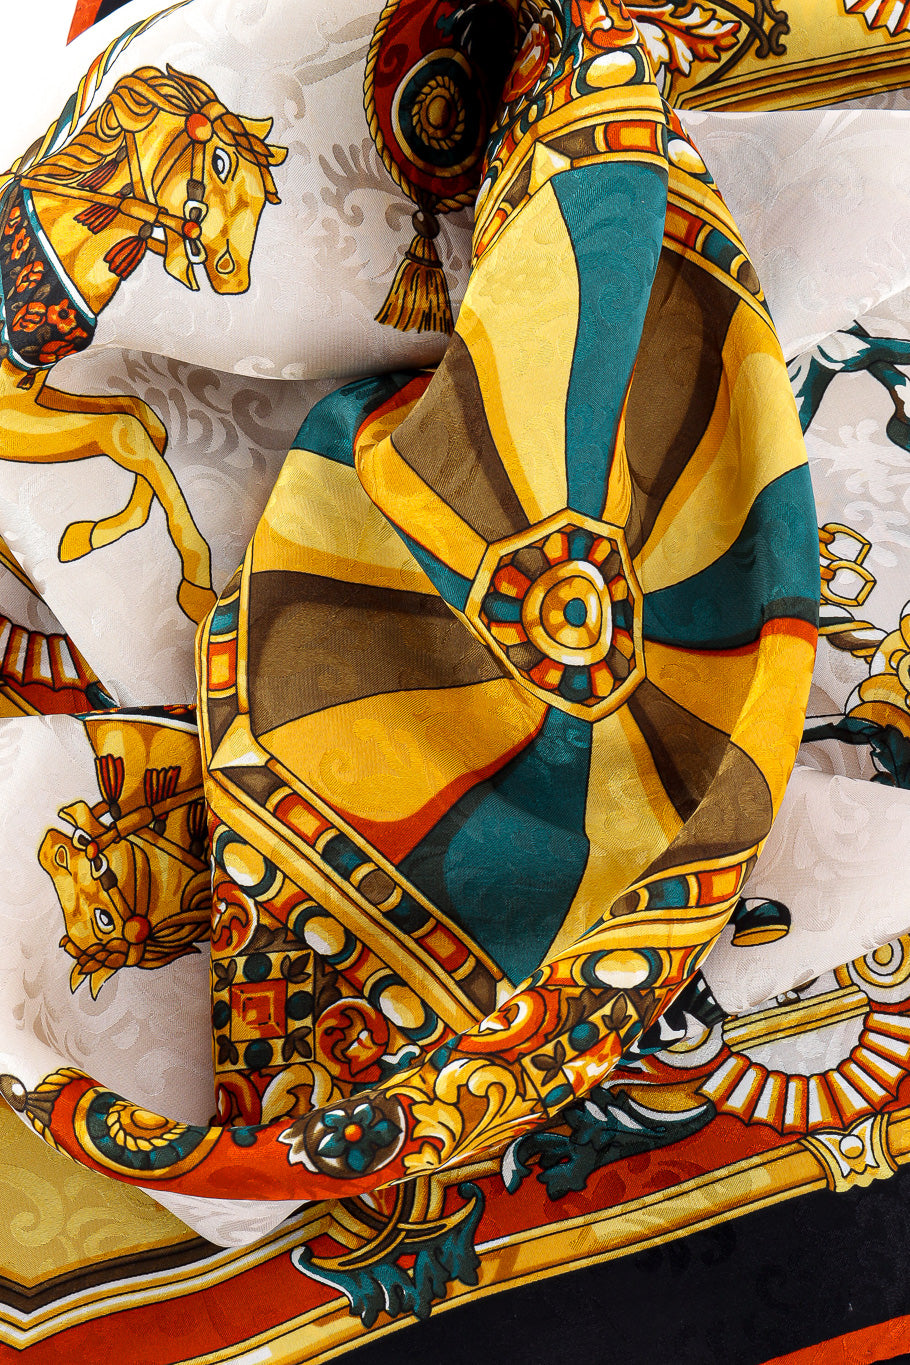 Merry-go-round print scarf by Pierre Cardin photo of Fabric Details. @recessla